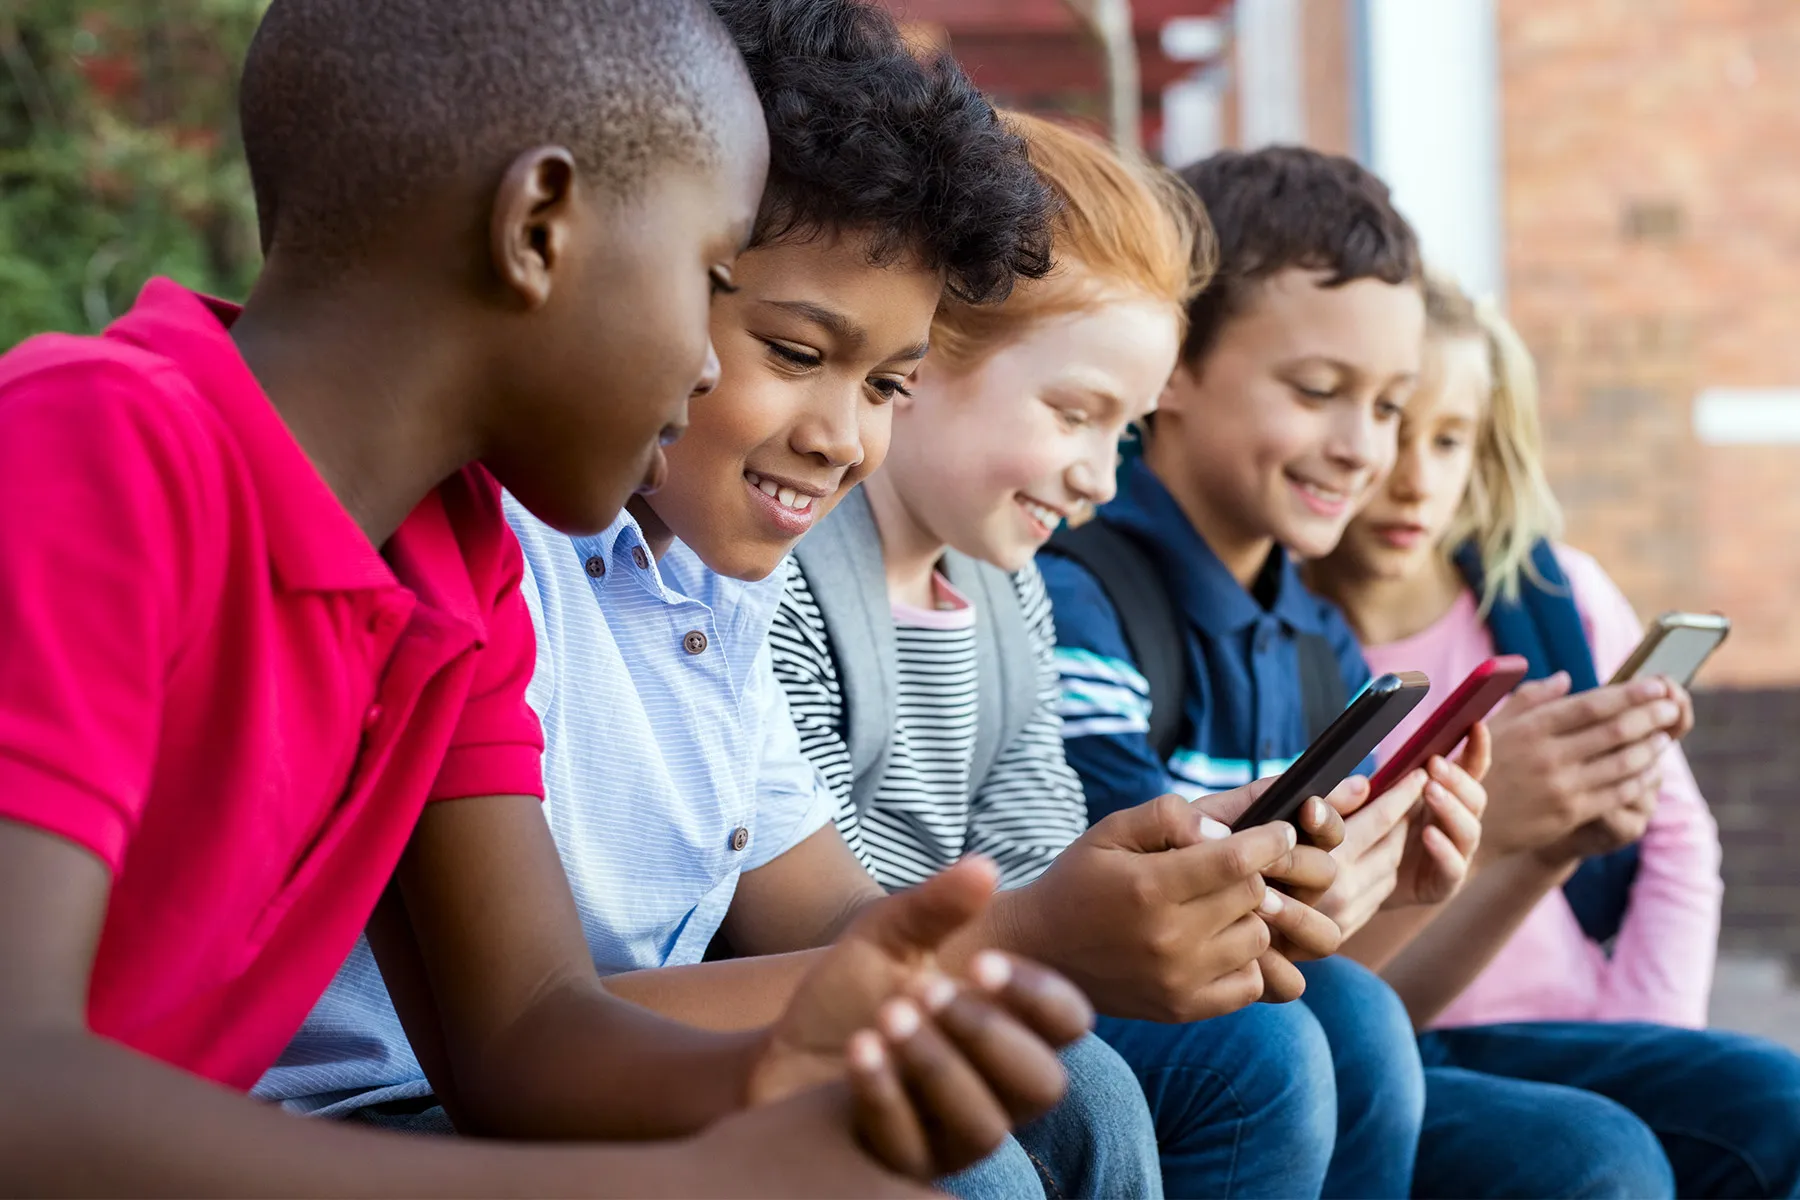 Powering Down Cellphone Use in Middle Schools